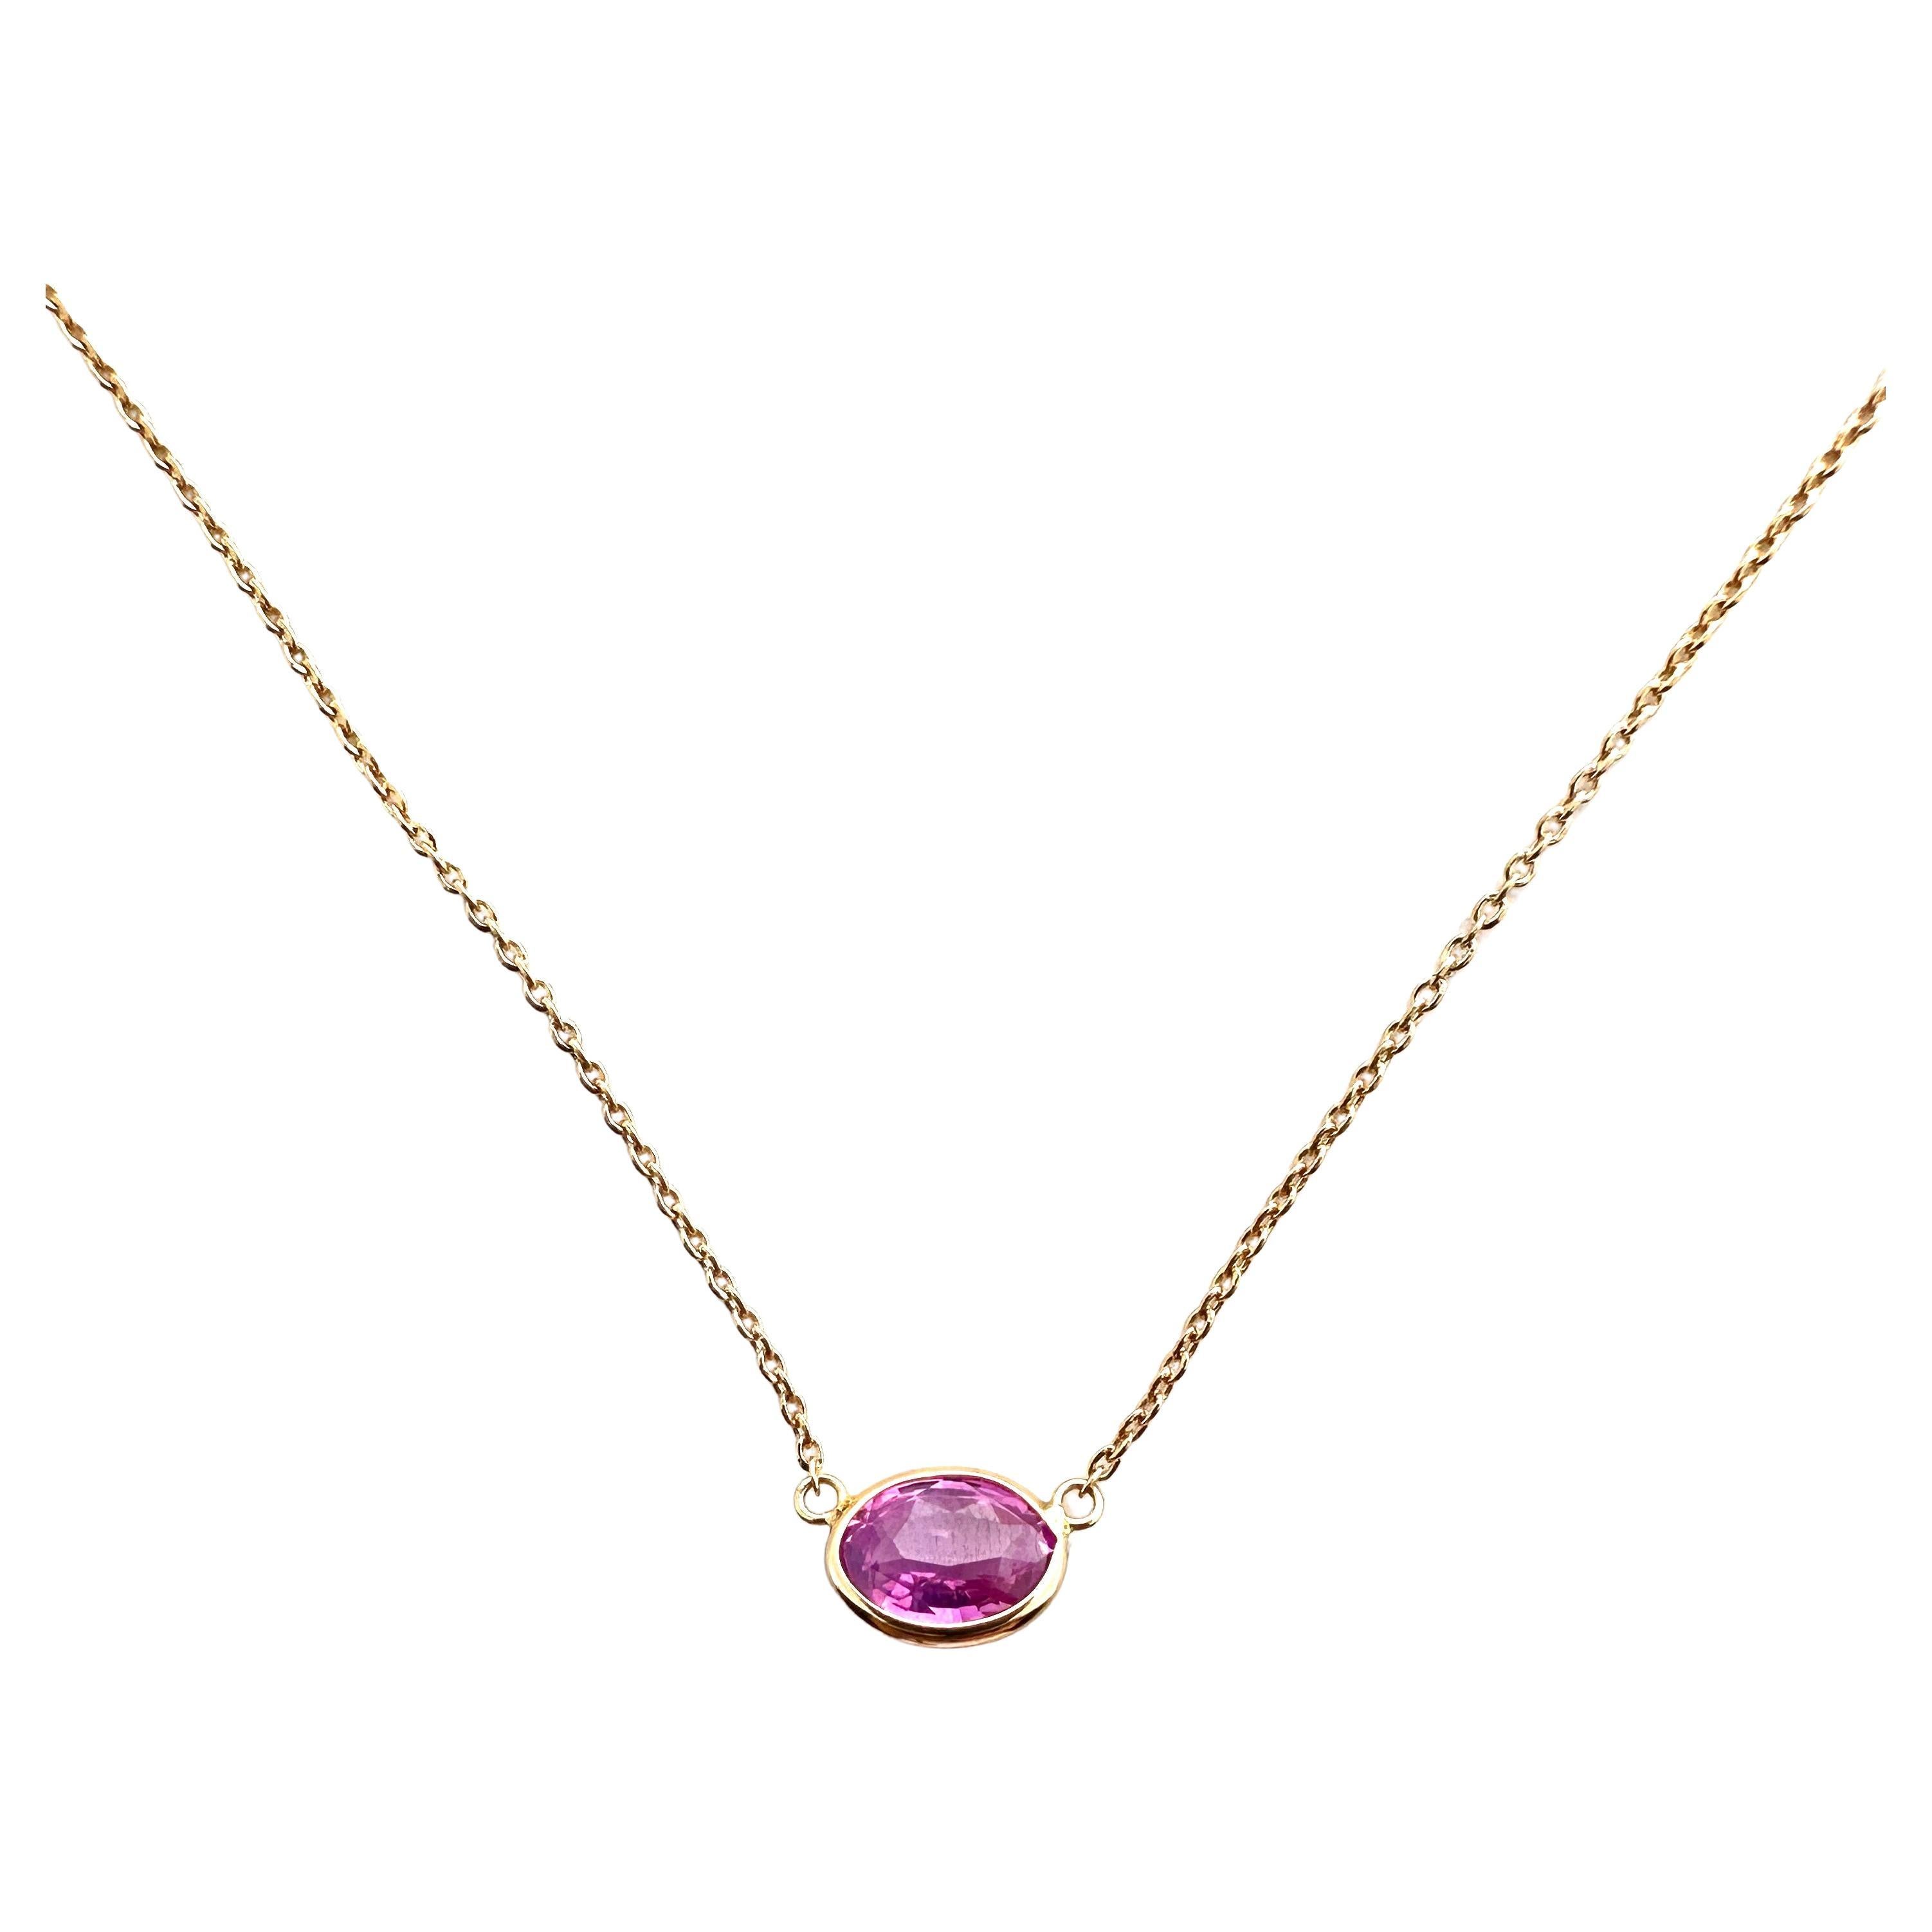 1.74 Ct Weight Certified Pink Sapphire Oval Cut Solitaire Necklace In 14K RG For Sale